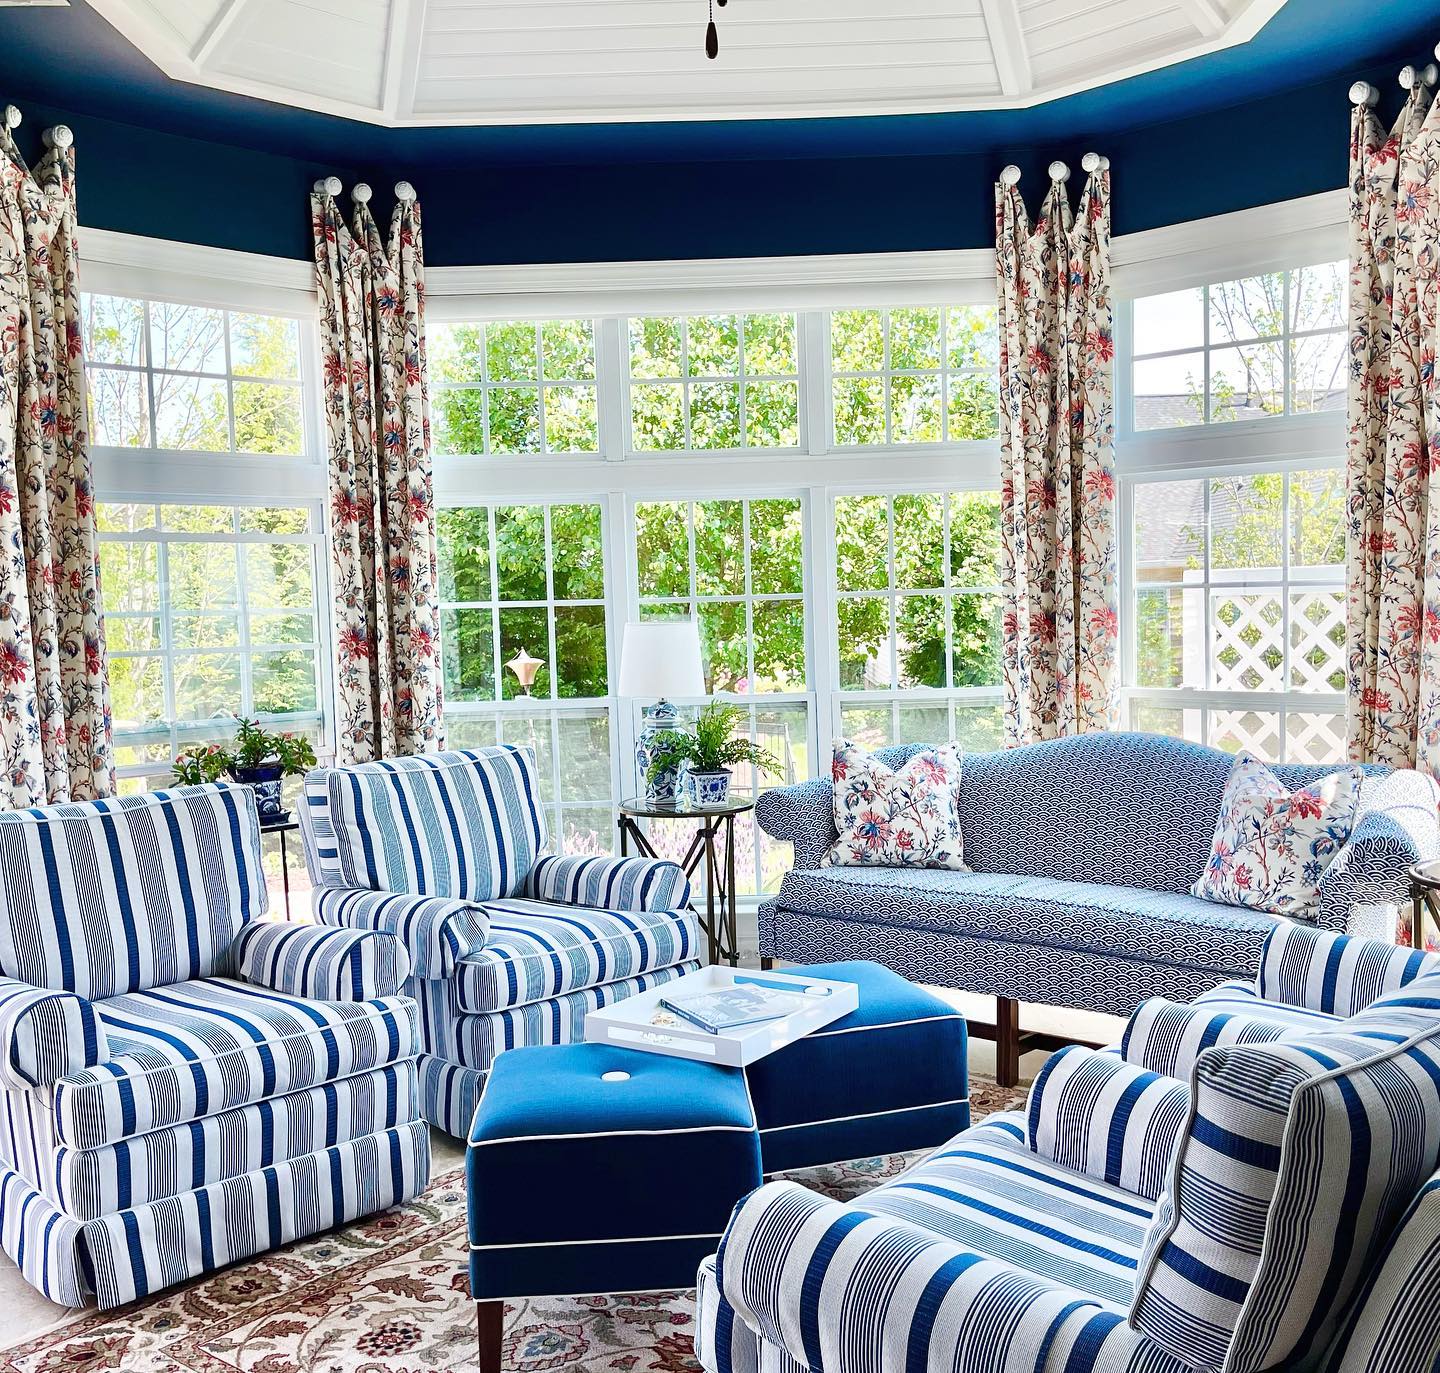 Photo of a completed sunroom seating area design project with 4 blue upholstered chairs, 2 ottomans, and a sofa